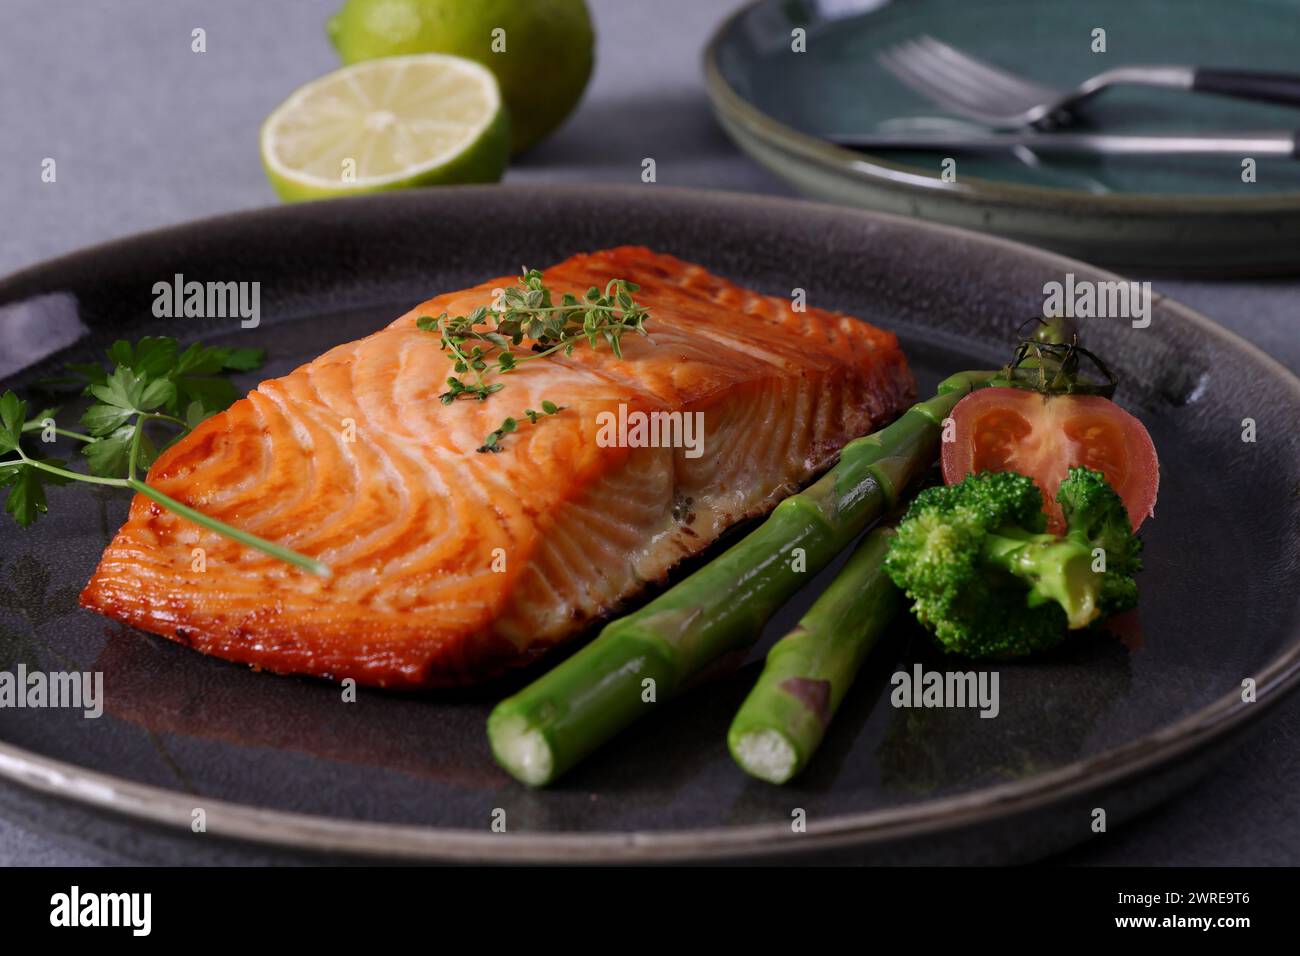 Pan-seared salmon steaks are a delicious and healthy dish. The salmon is cooked to perfection, so the skin is crispy and the flesh is moist. Stock Photo